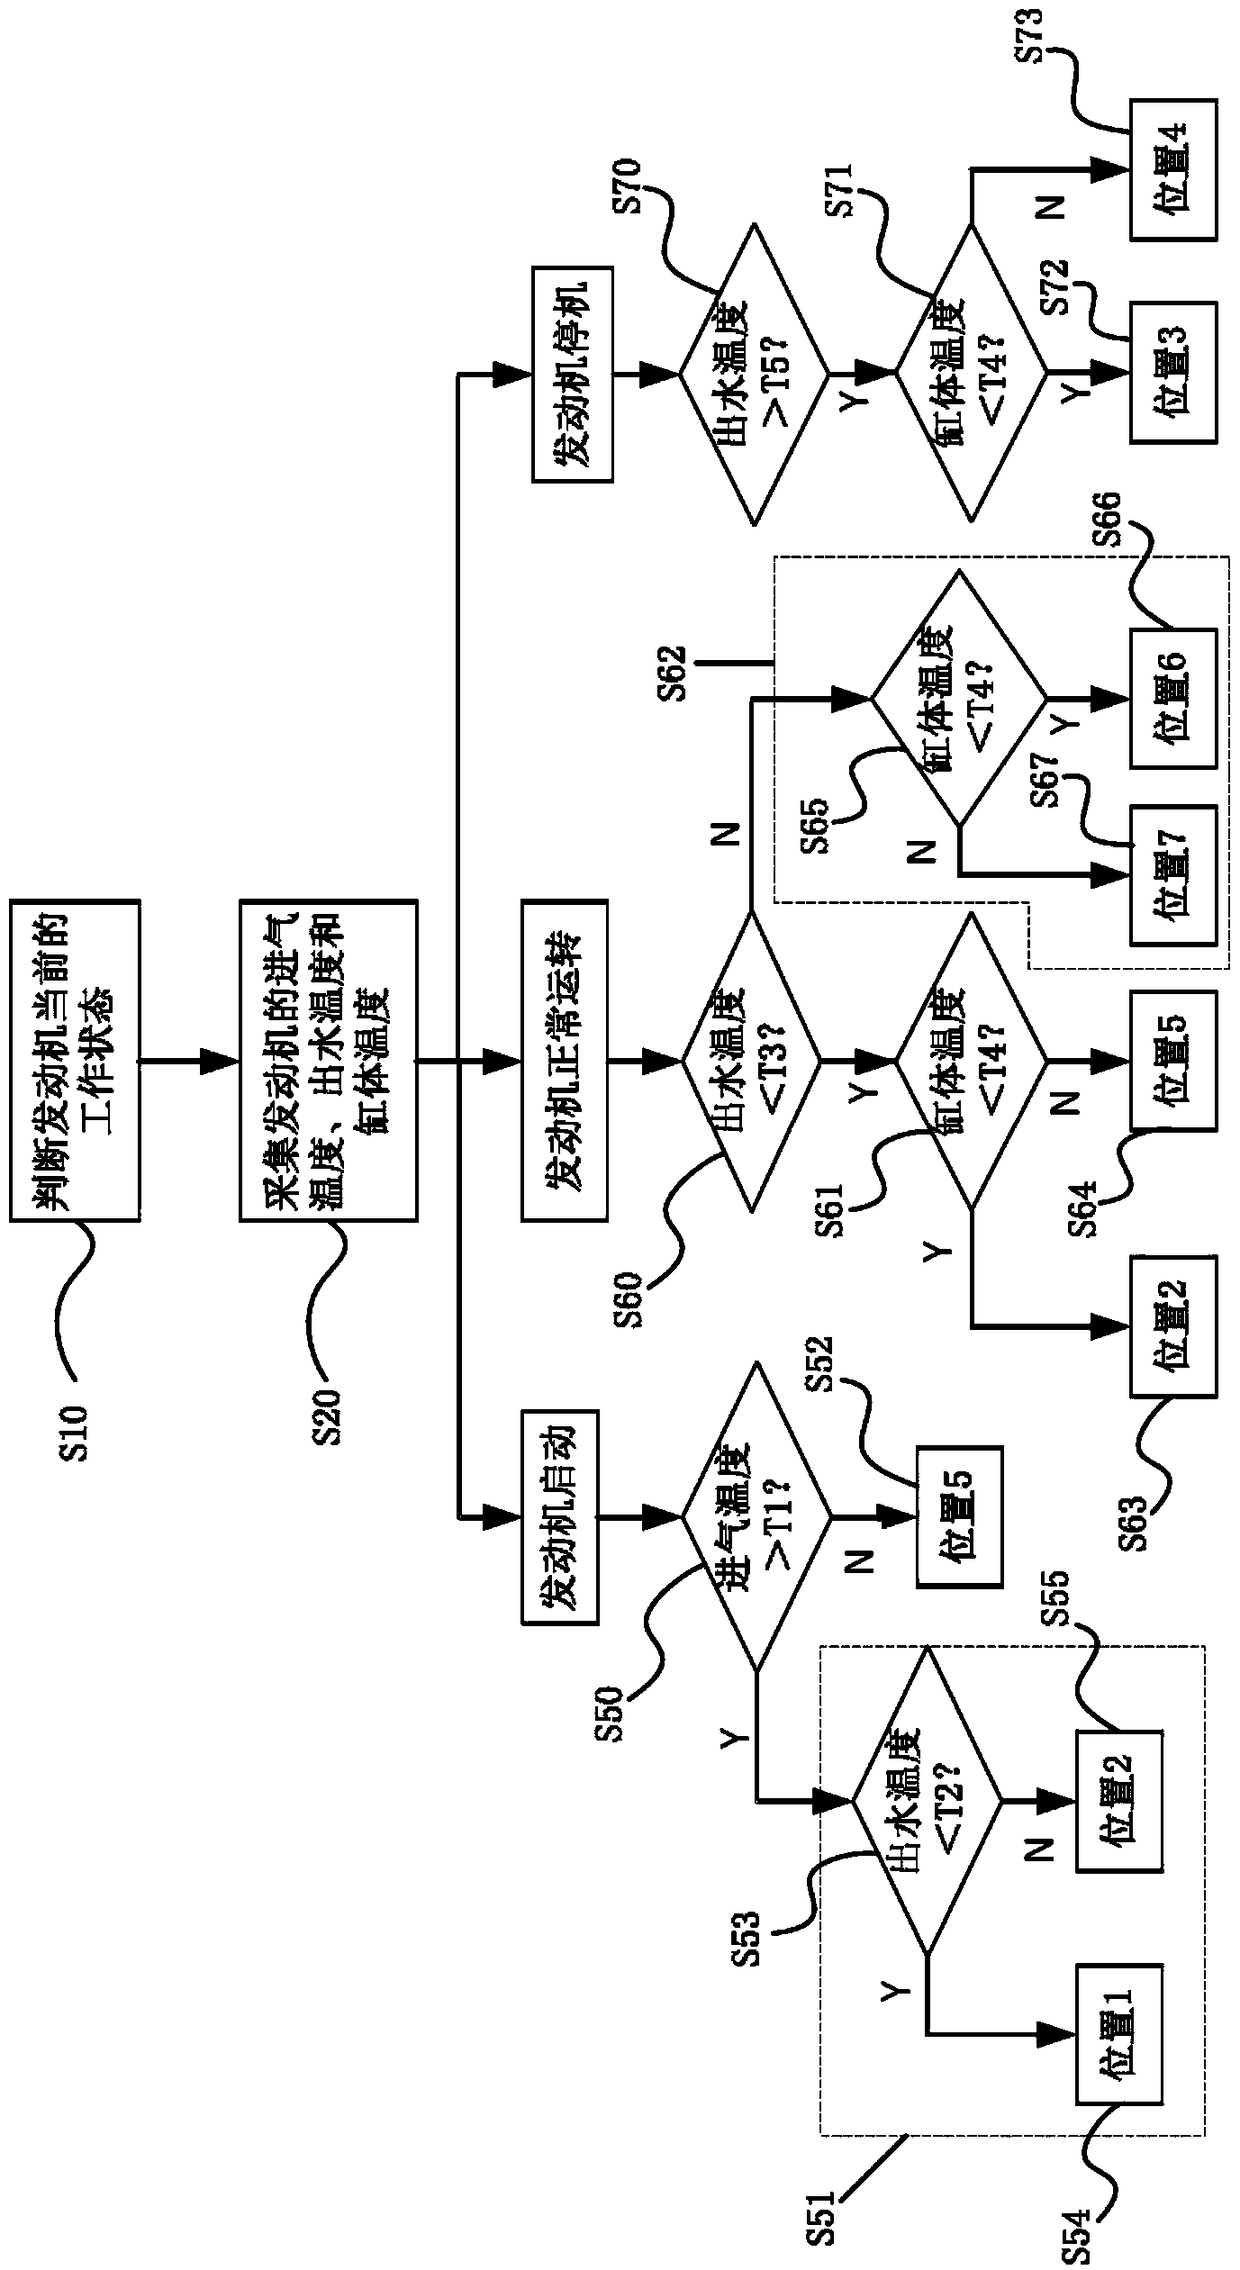 Heat management control method and system for engine